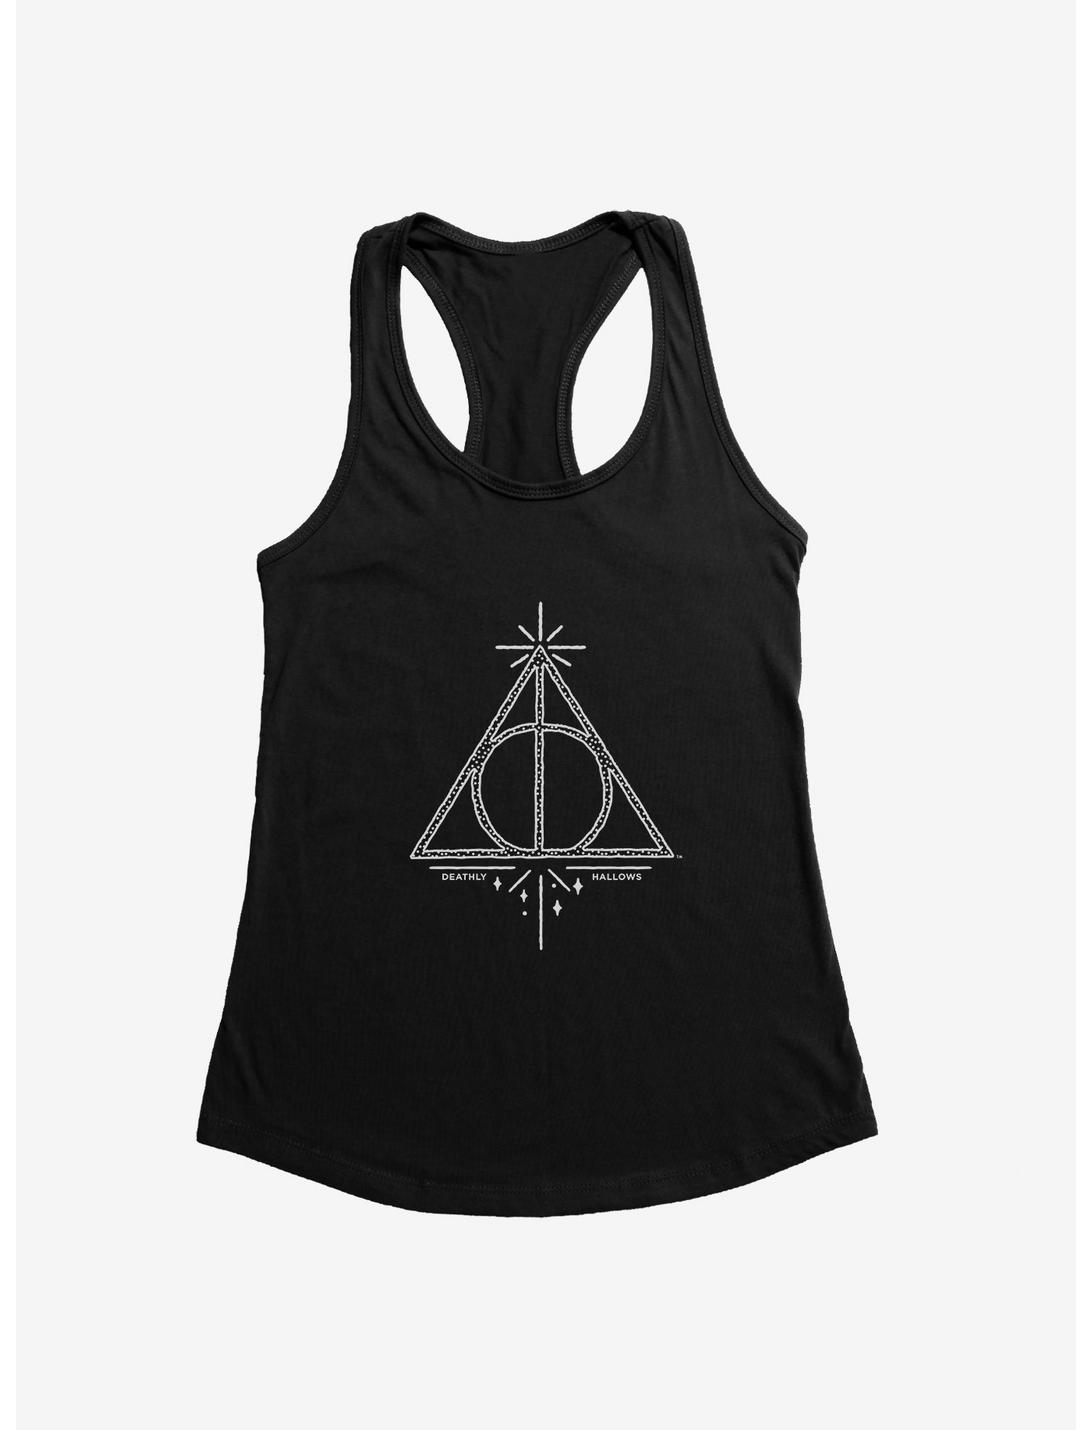 Harry Potter Deathly Hallows Icon Girls Tank, BLACK, hi-res